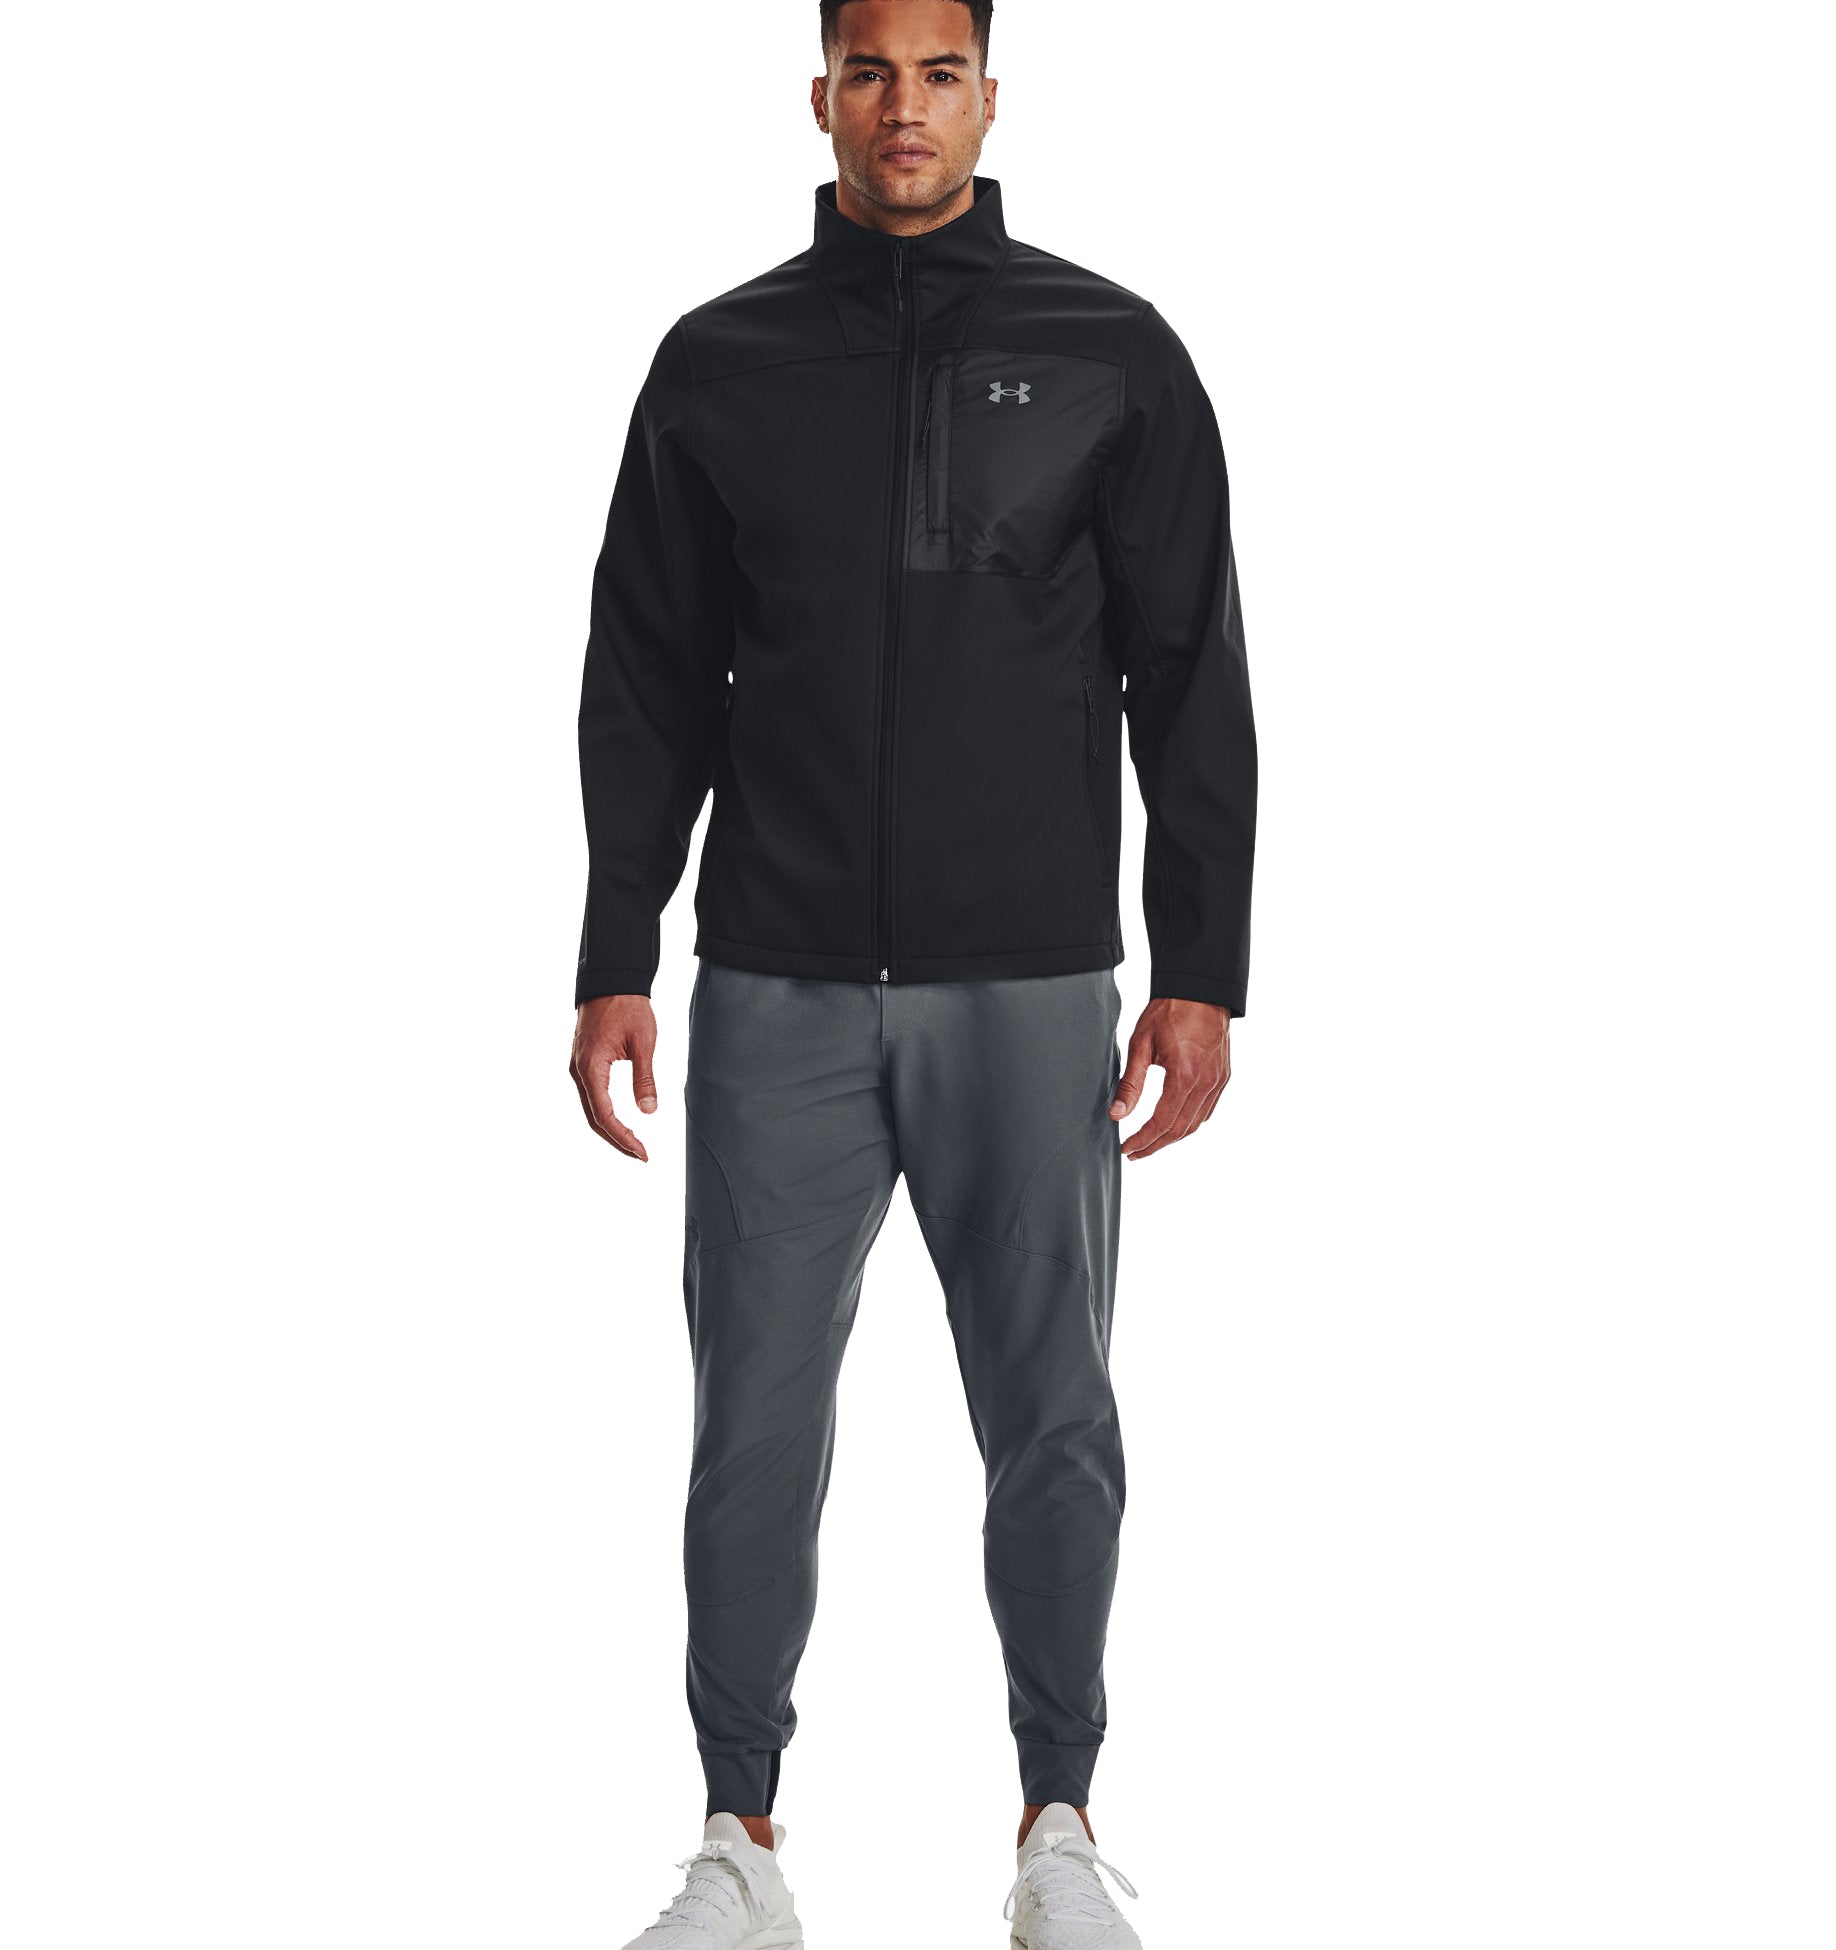 Under Armour Men's Storm ColdGear Infrared Shield Jacket Pitch Gray/Black  132143